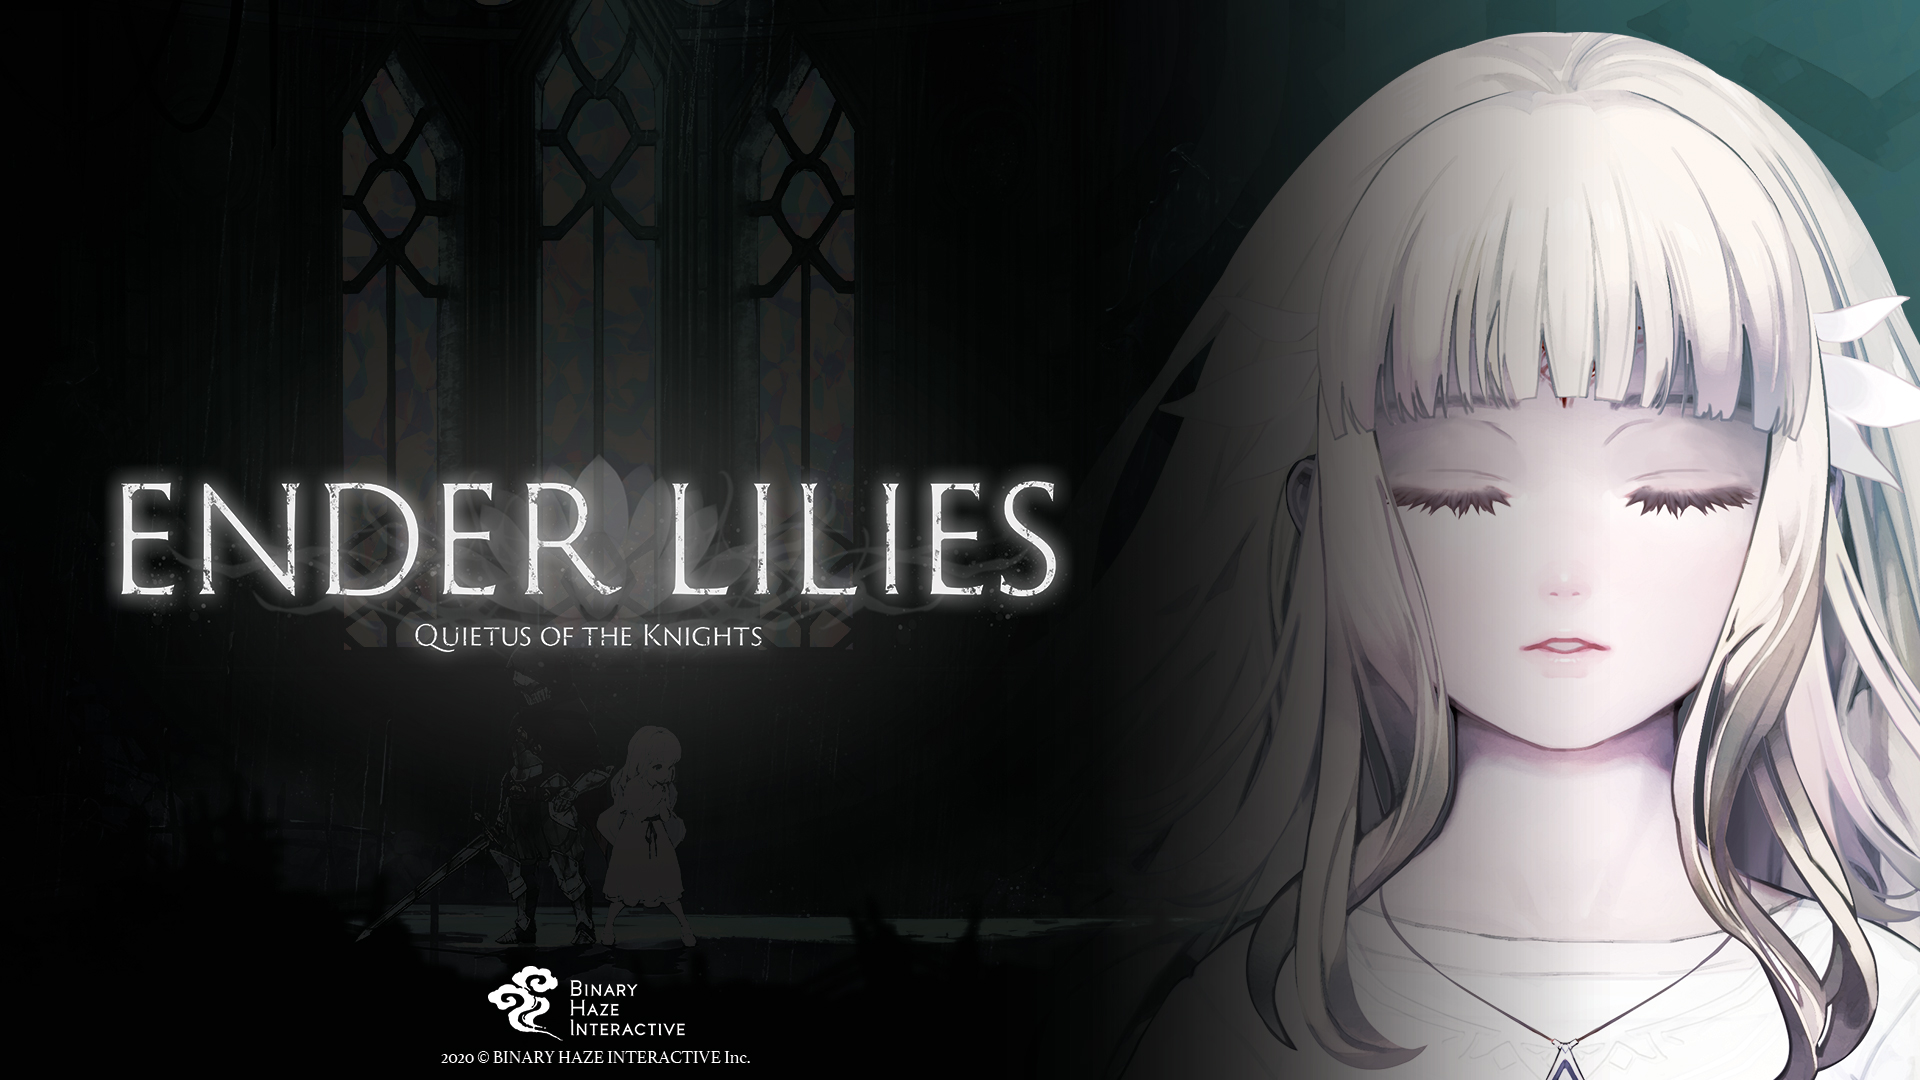 Ender Lilies: Quietus of the Knights arrives on PlayStation